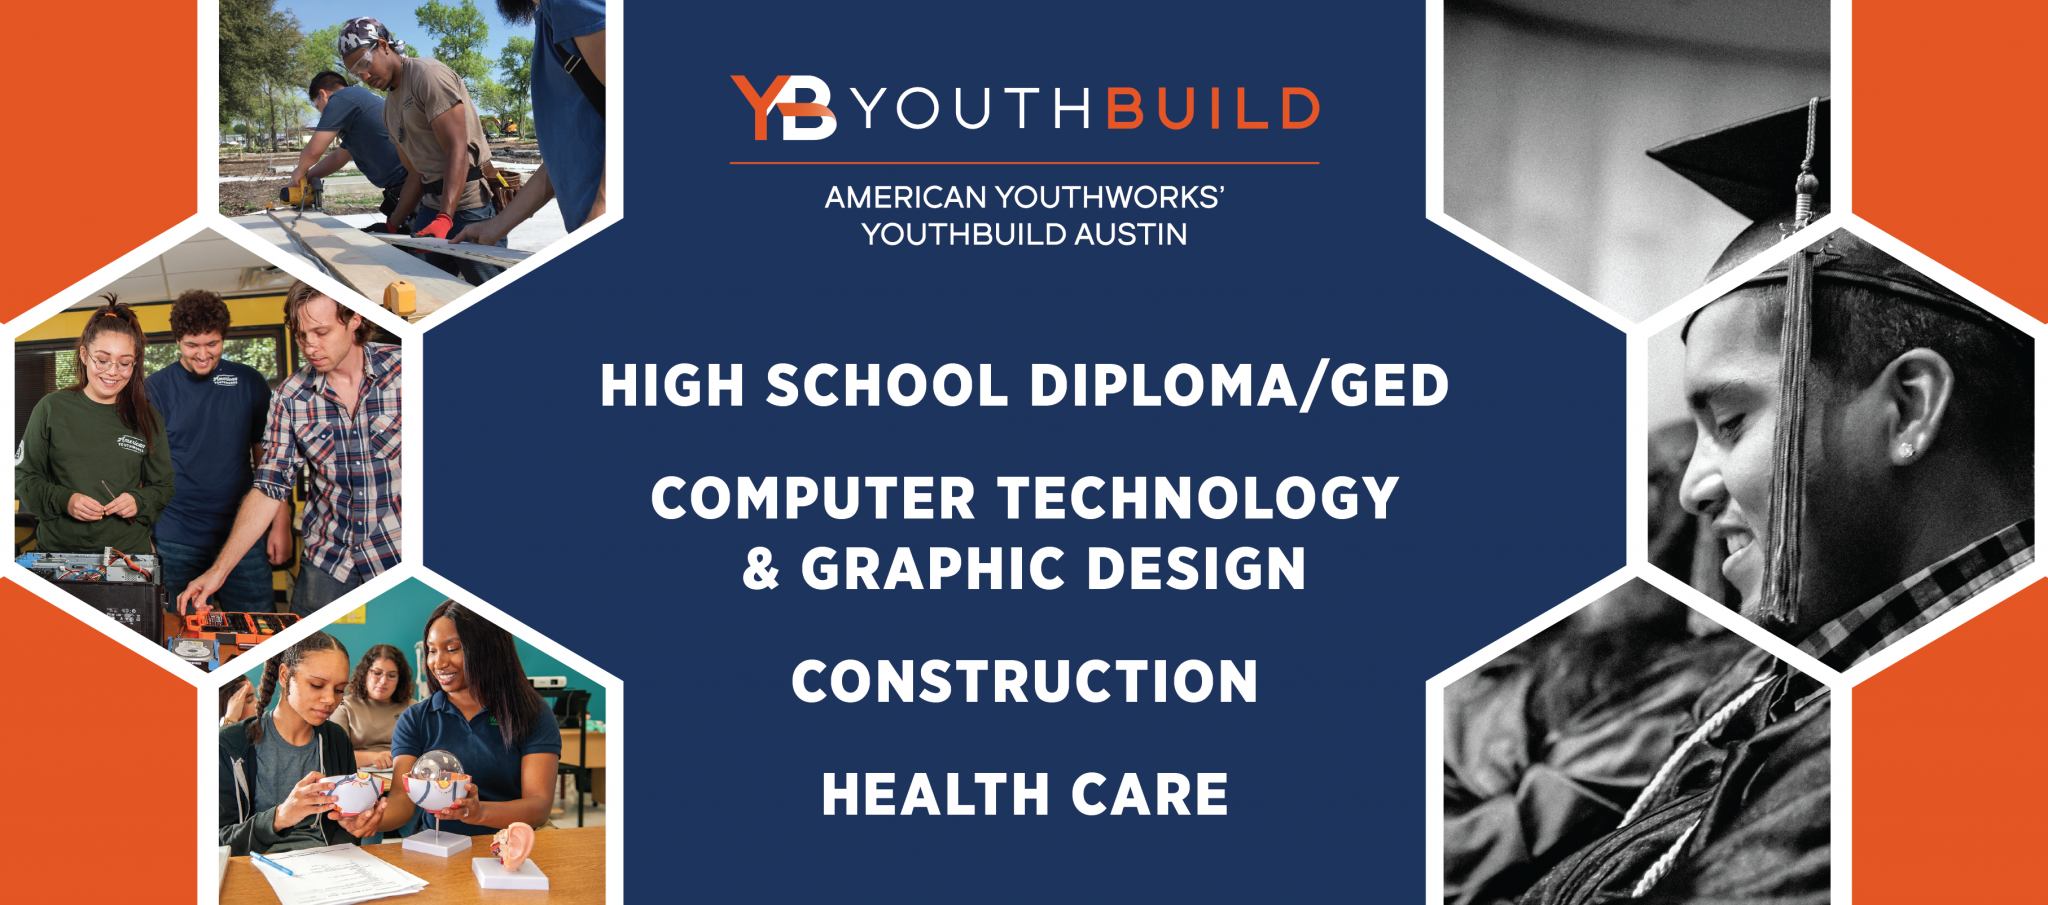 High school diploma & GED, computer technology & graphic design, construction, health care.